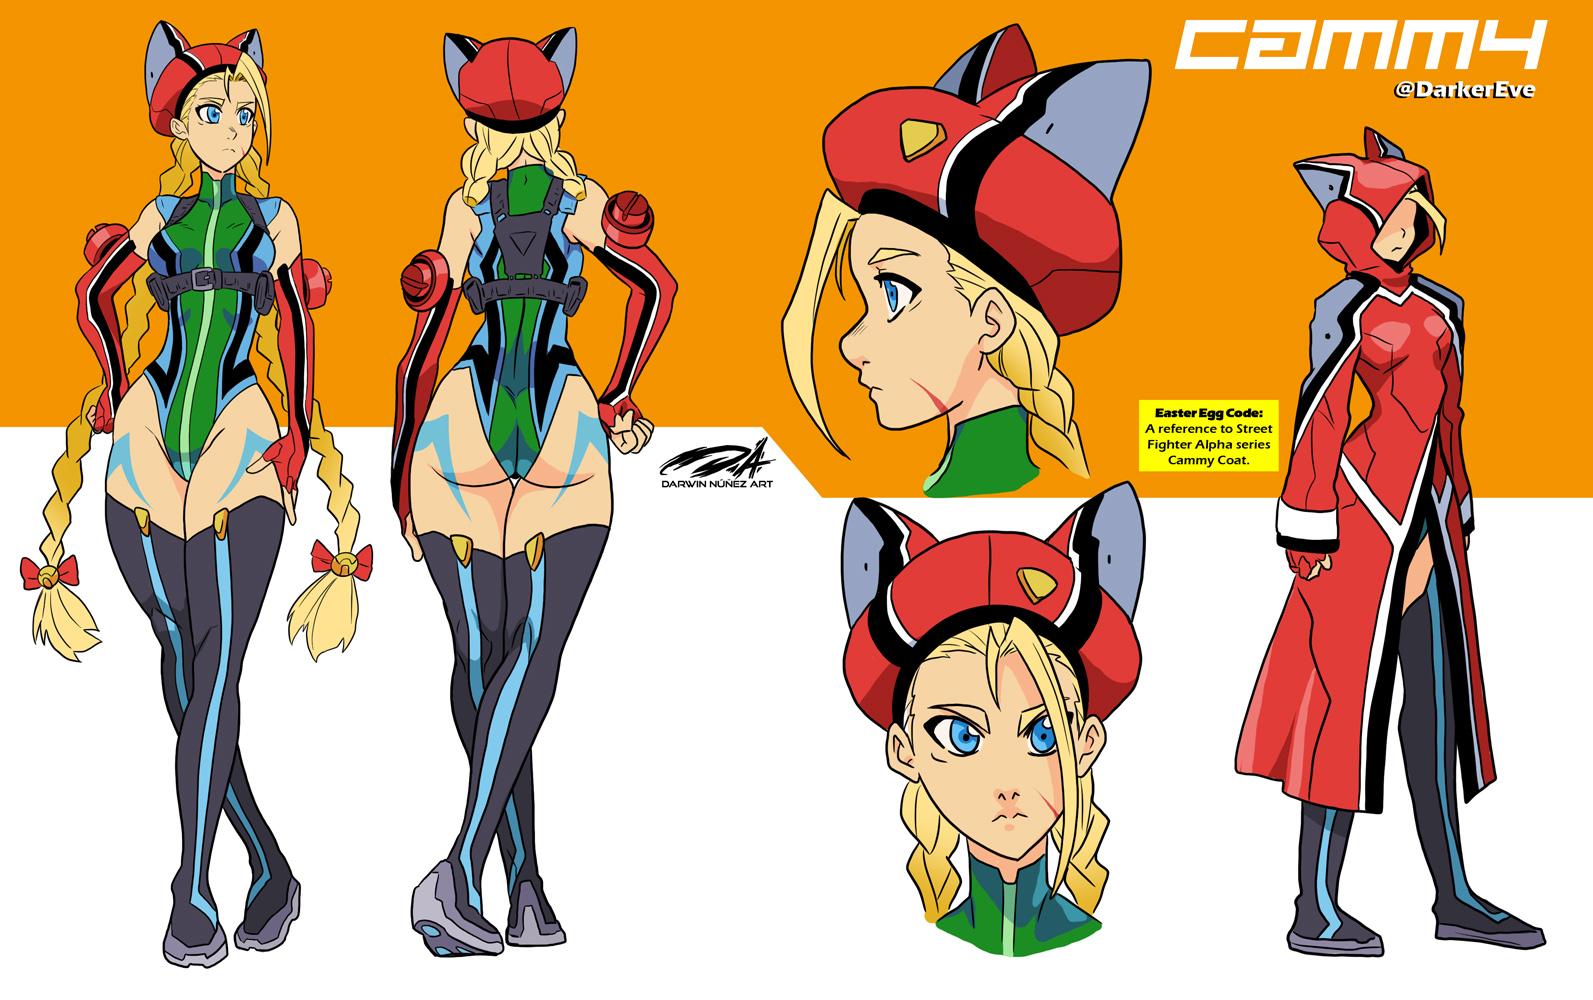 SFV:CE 👗 Cammy all official costumes 👗 